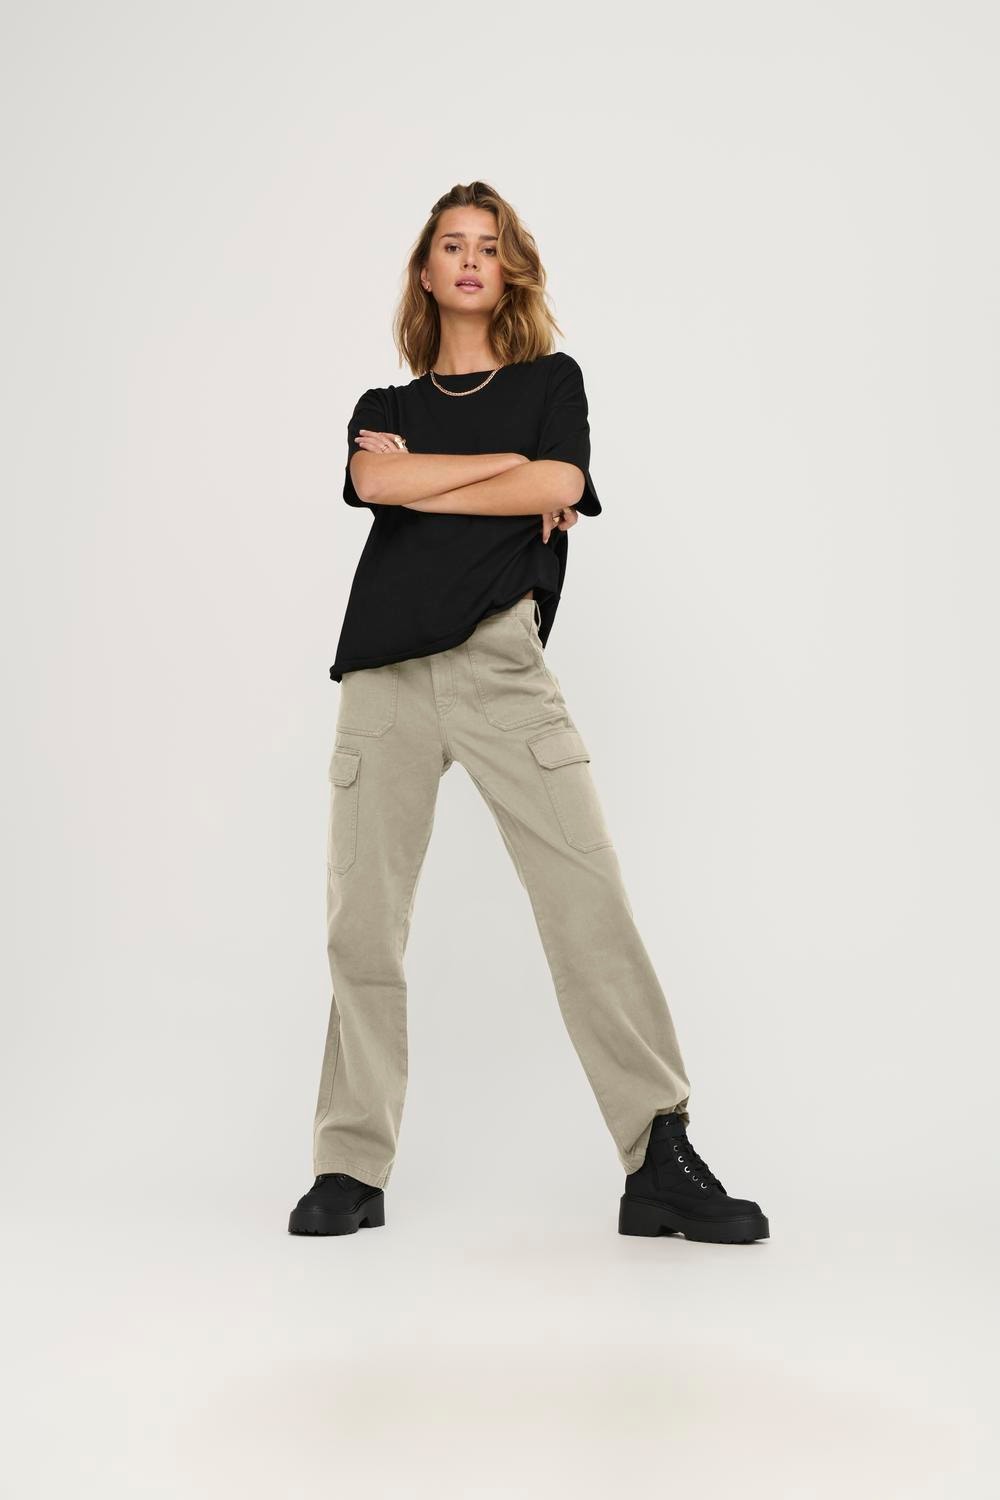 ONLY cargo pants with high waist -Silver Lining - 15300976